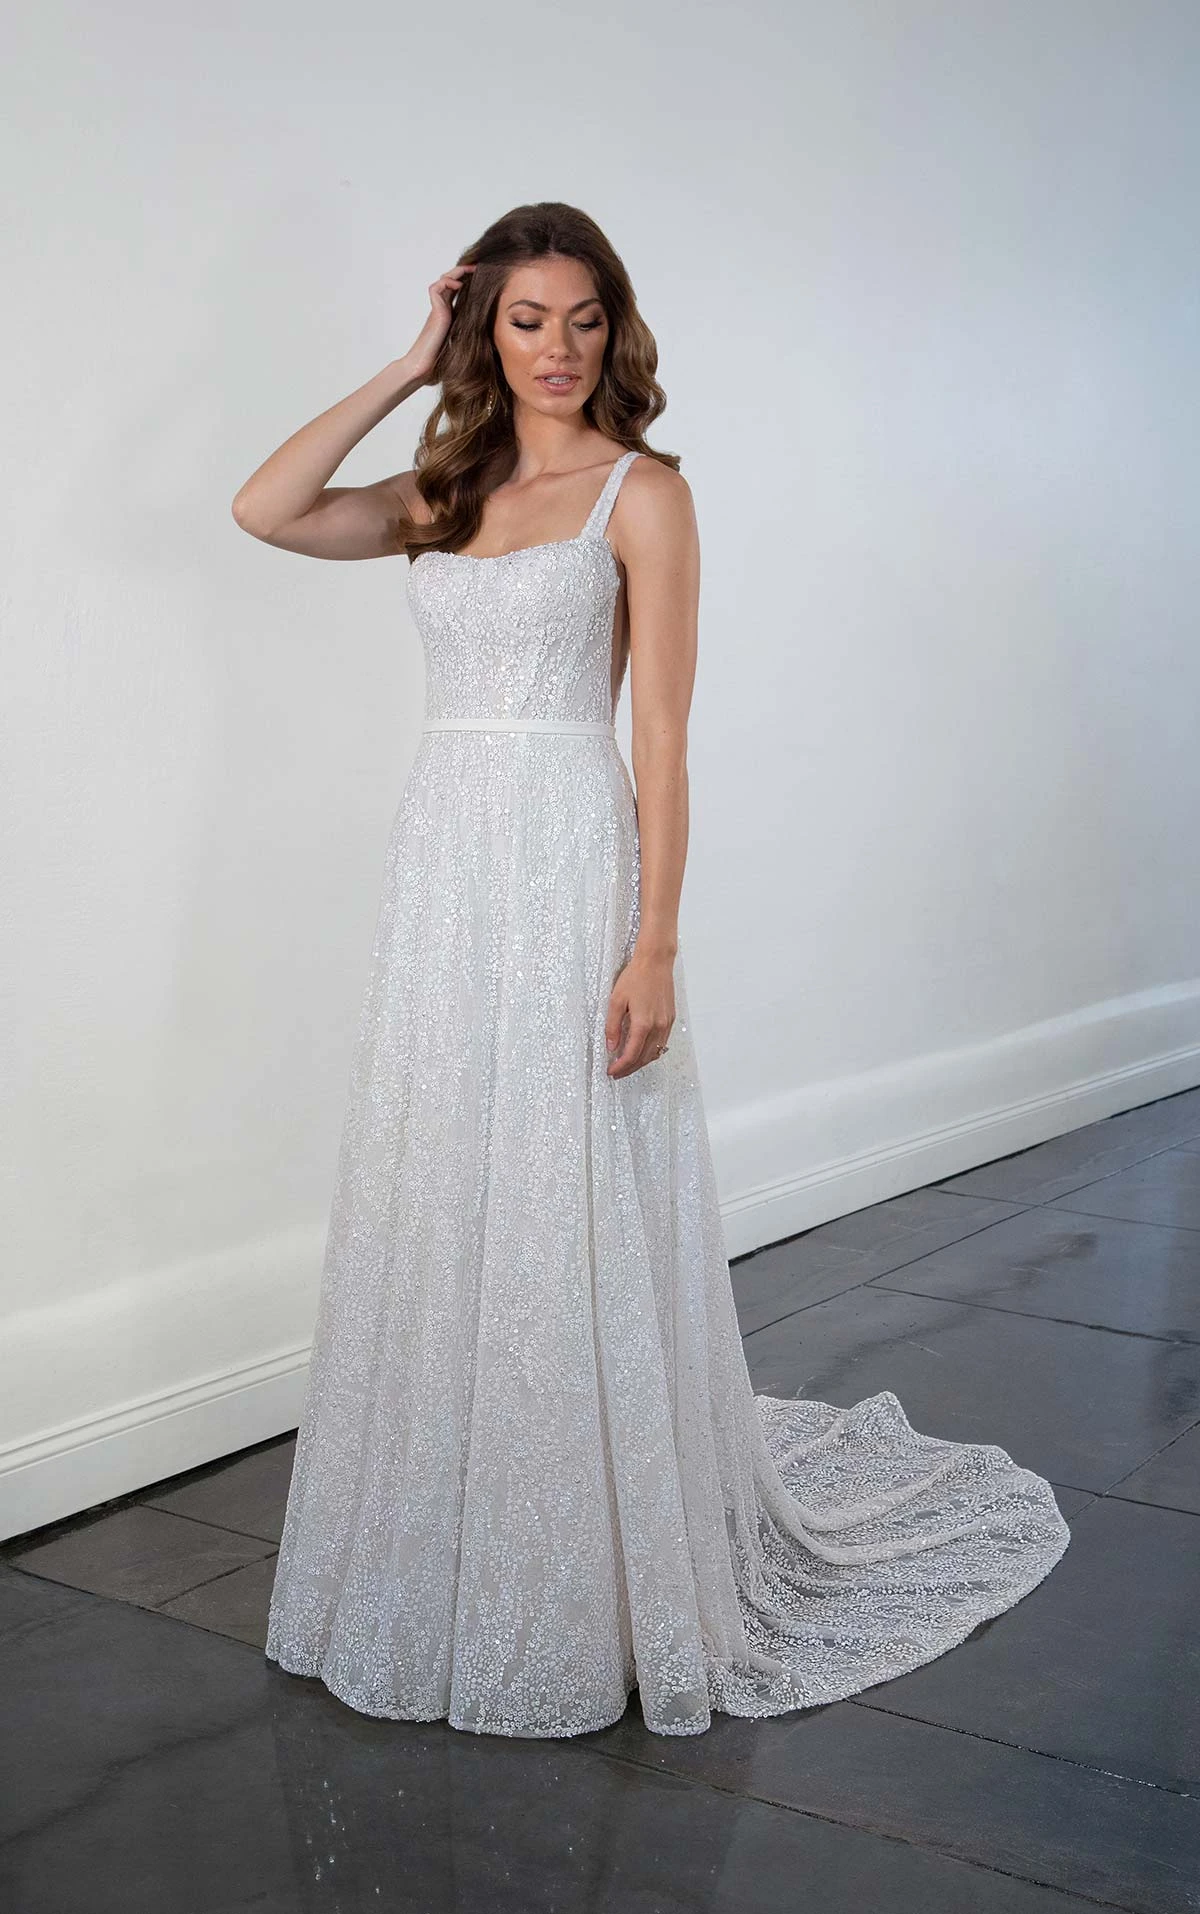 1519 Sparkling Sequin A-Line Wedding Dress with Sexy Side Plunge Cutouts  by Martina Liana